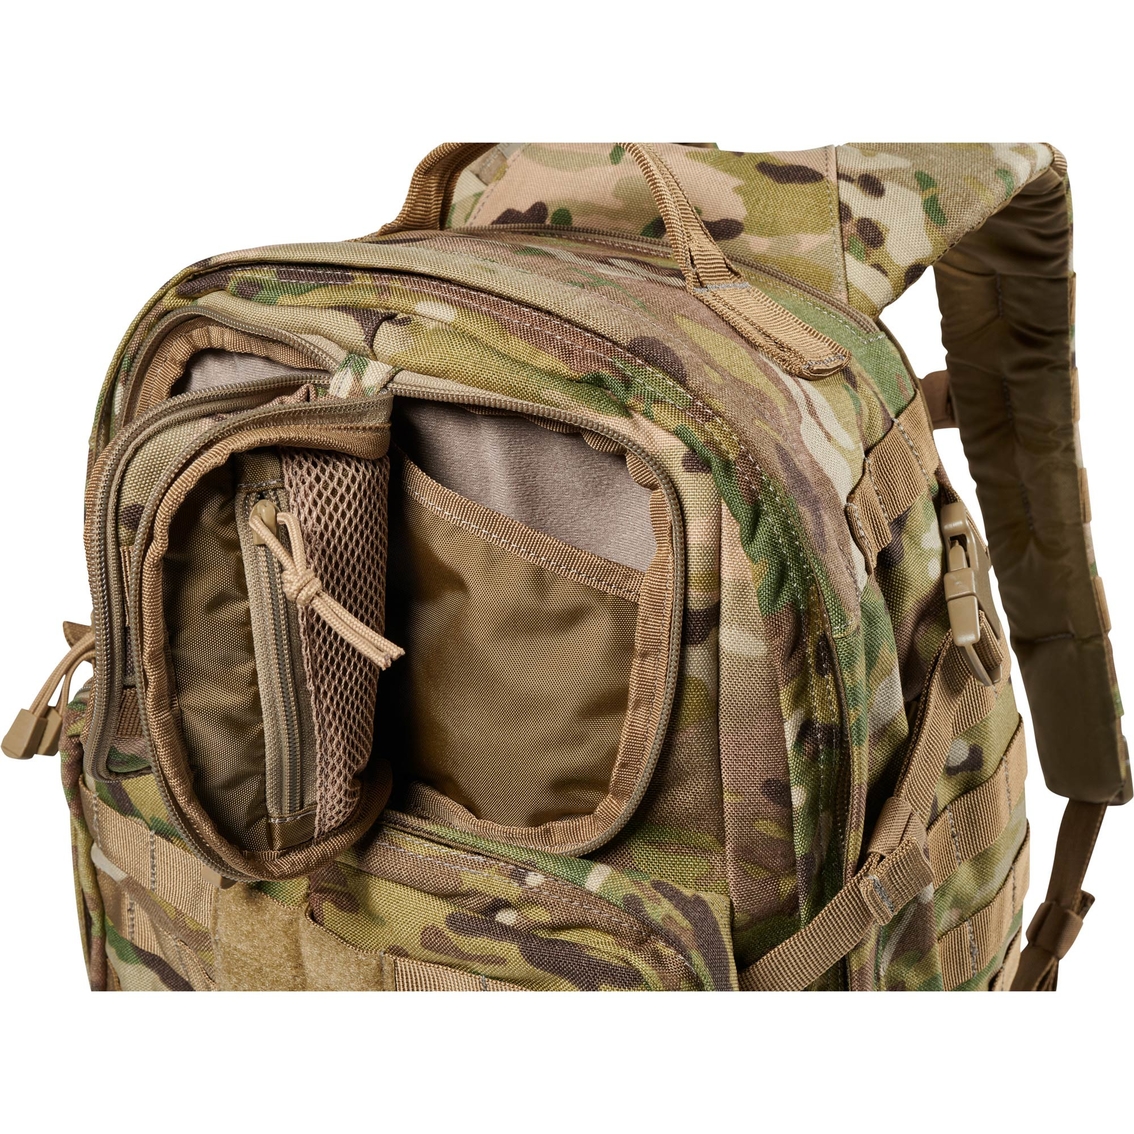 5.11 RUSH 24 2.0 Backpack - Image 9 of 10